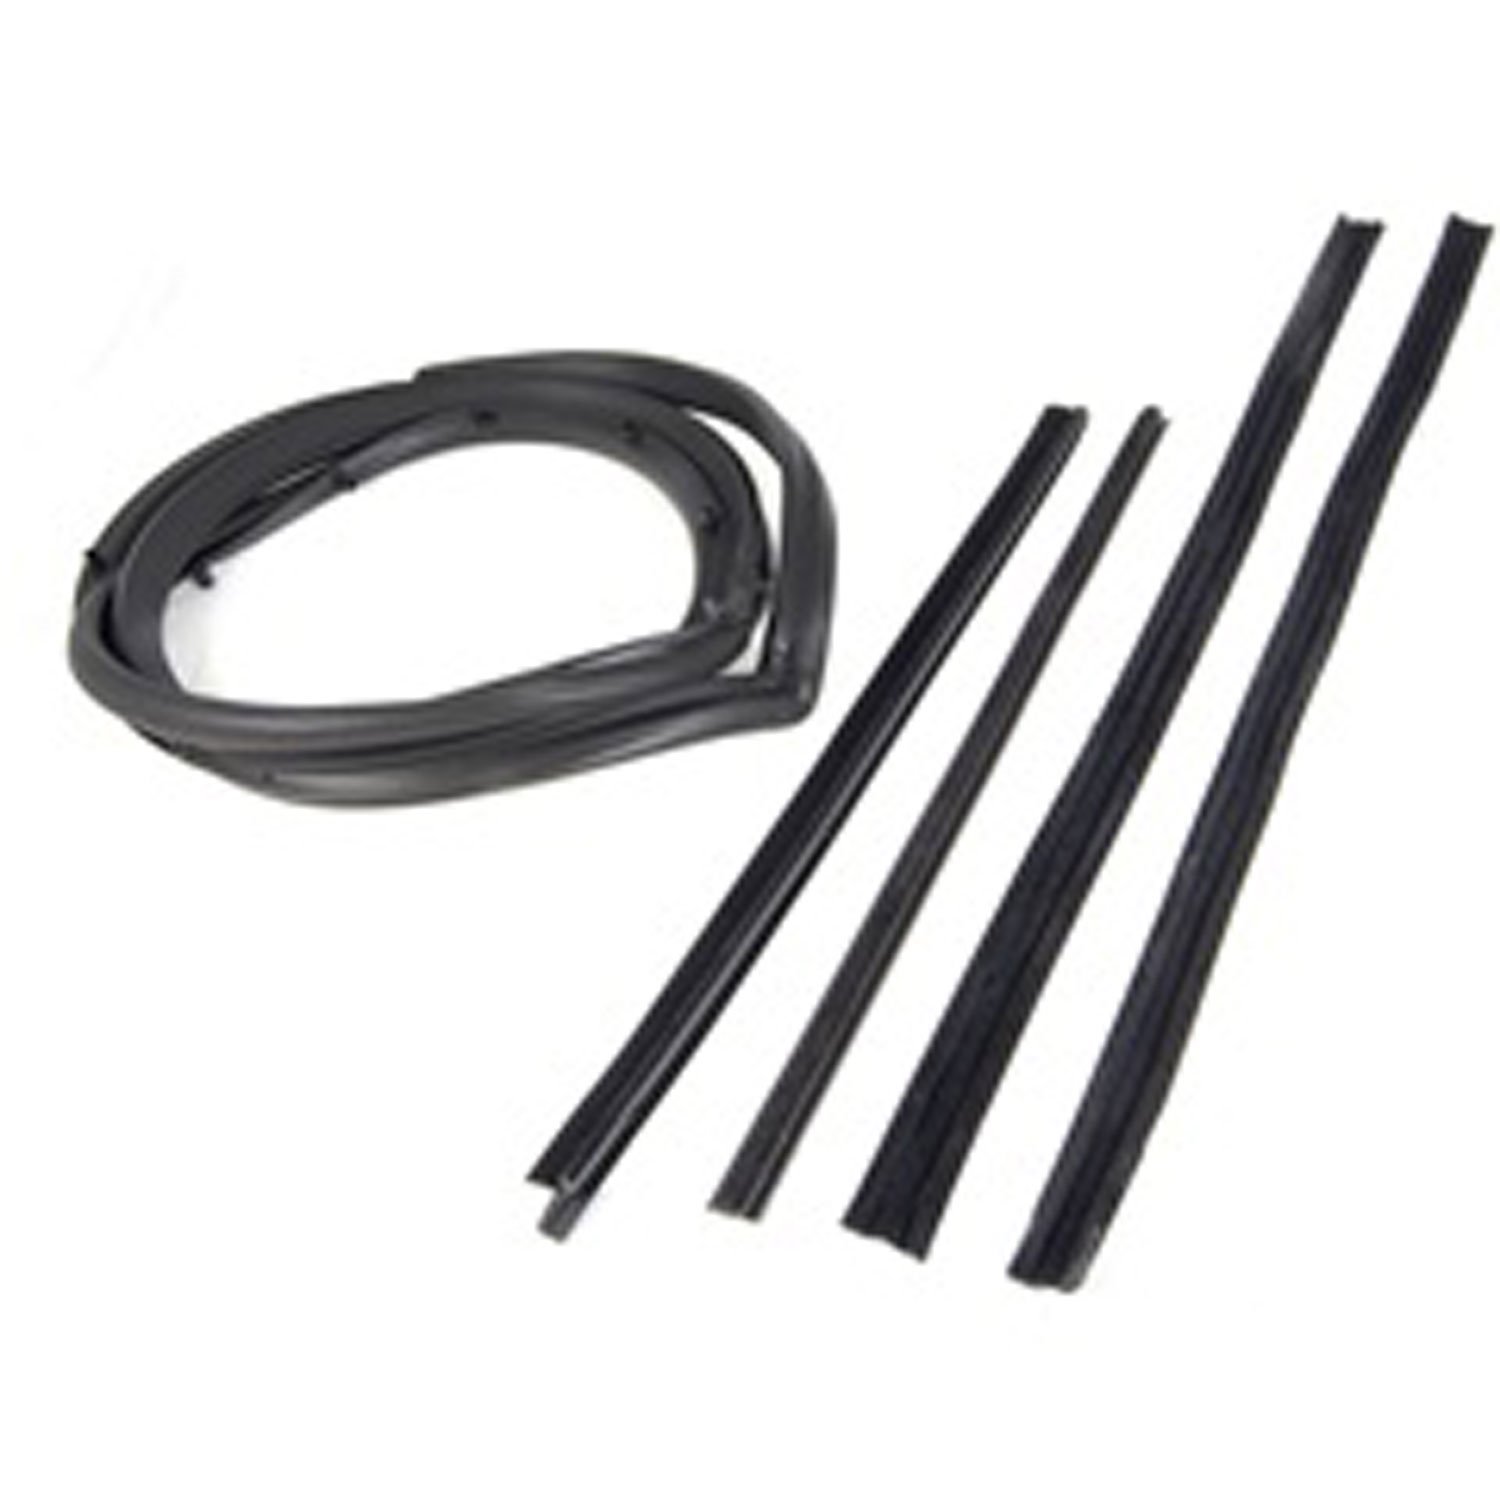 This 5 piece full door seal kit from